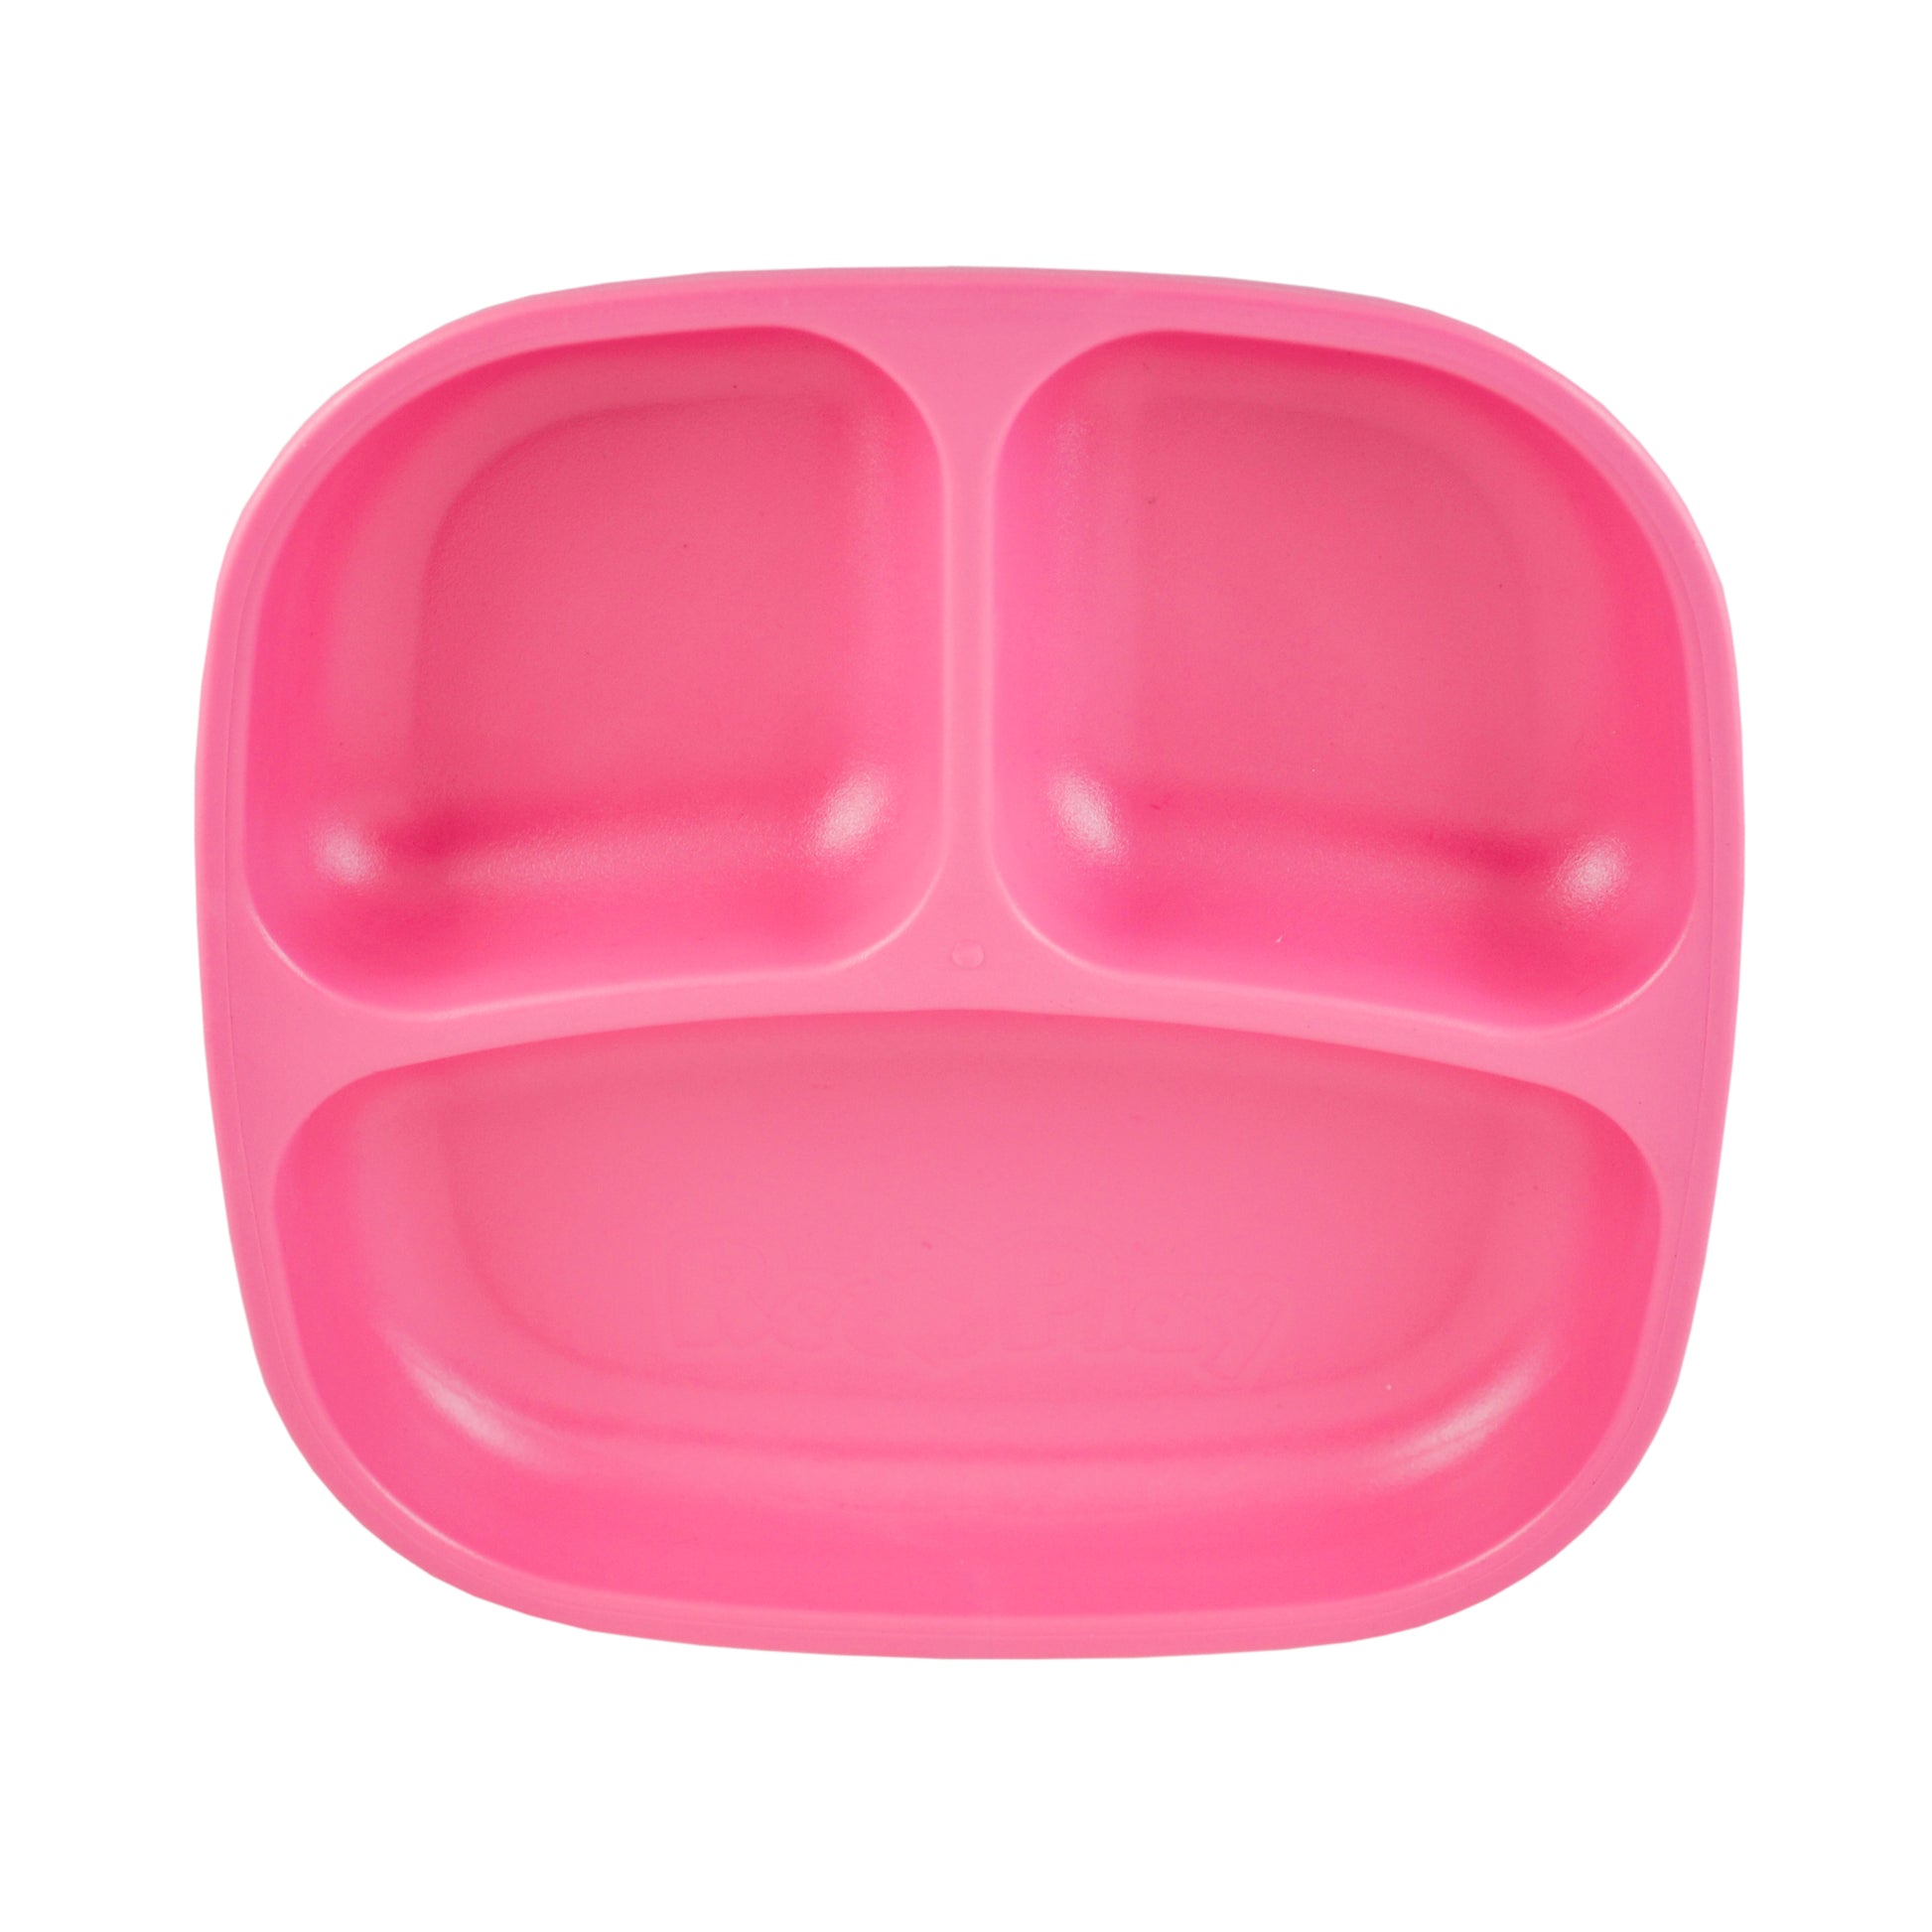 Replay Divider Plate Bright Pink